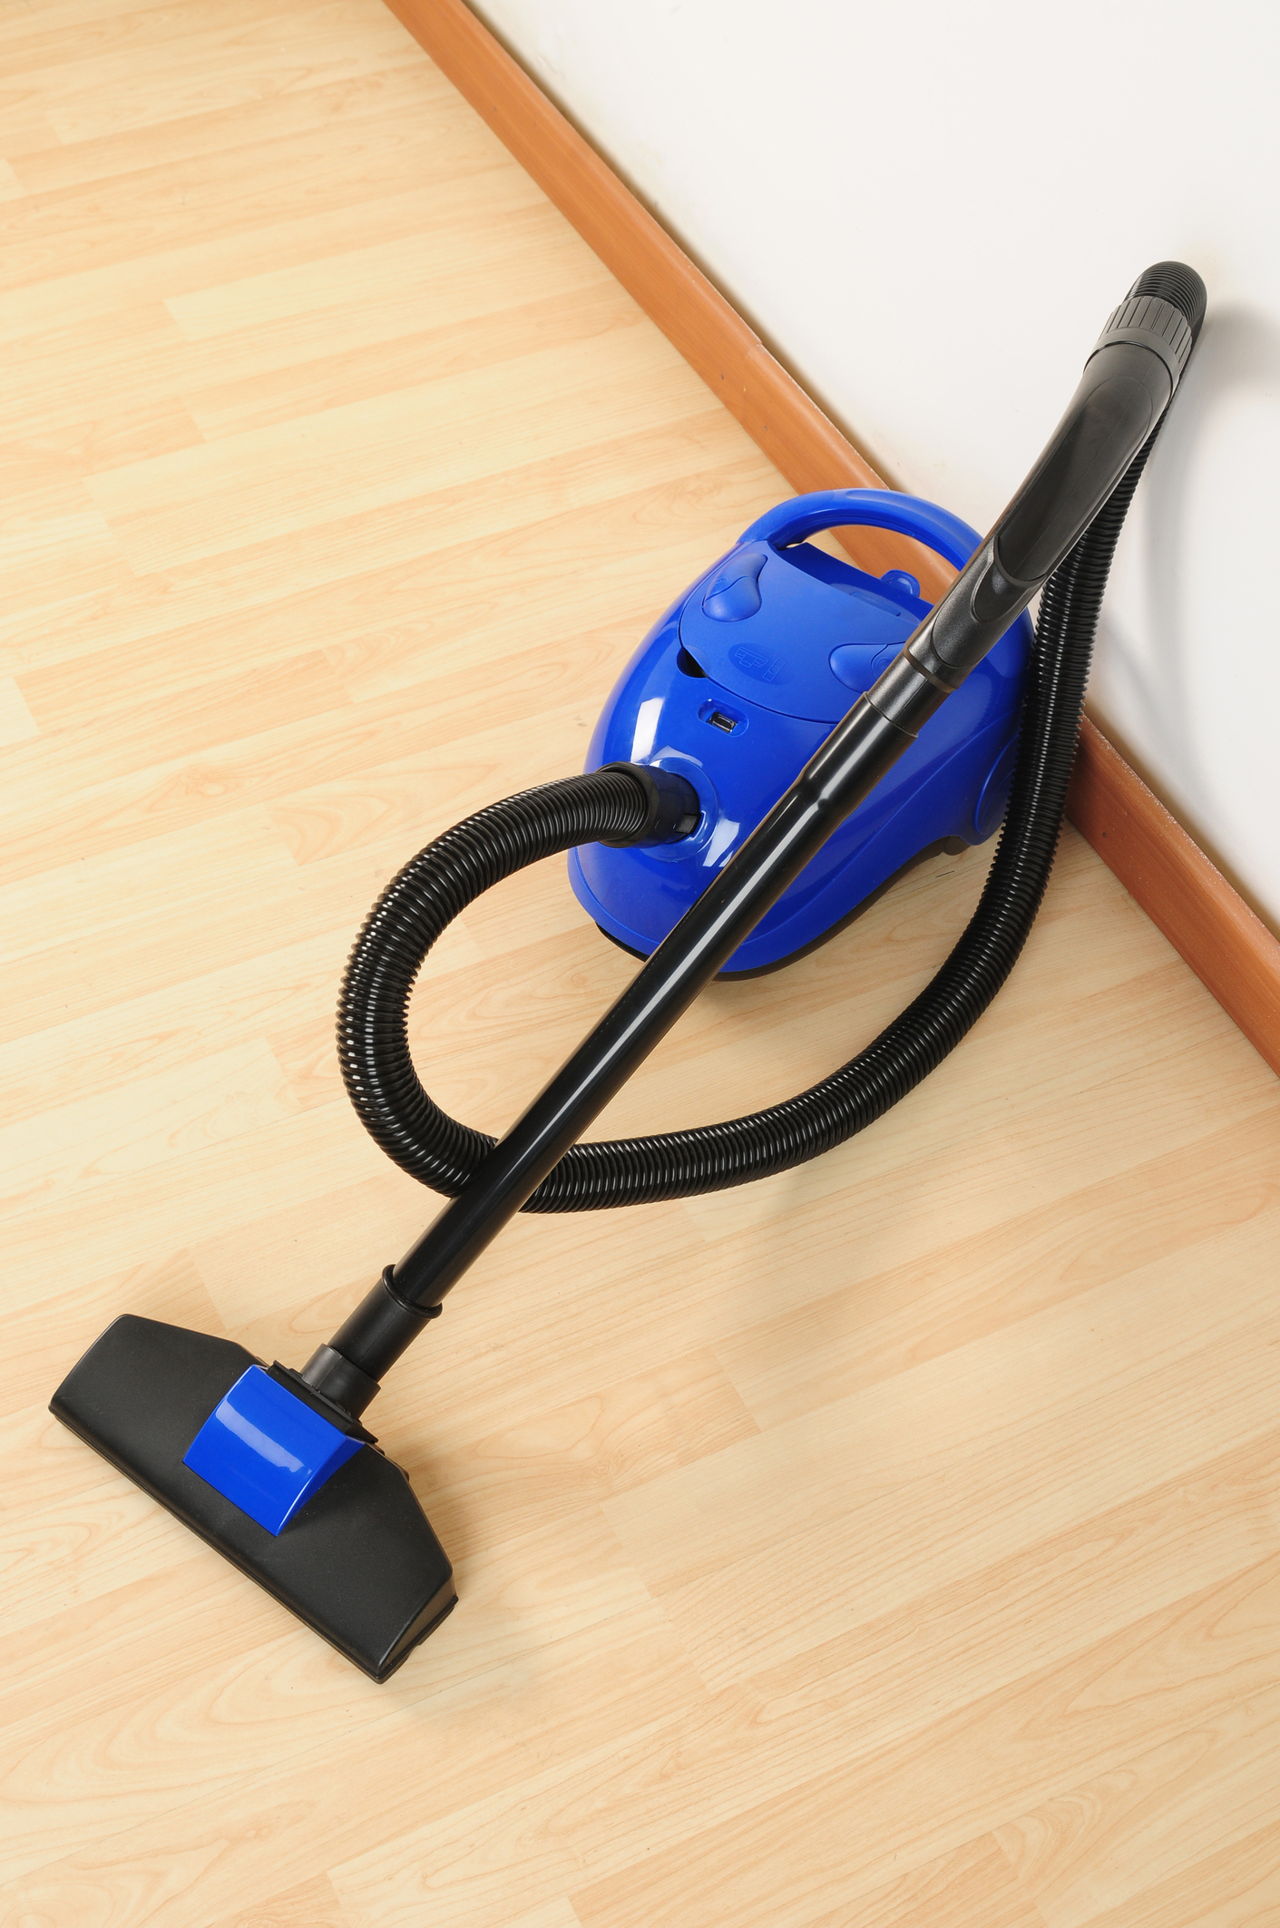 Clean Laminate Floors Without Streaking, How To Clean Dark Laminate Floors Without Streaking